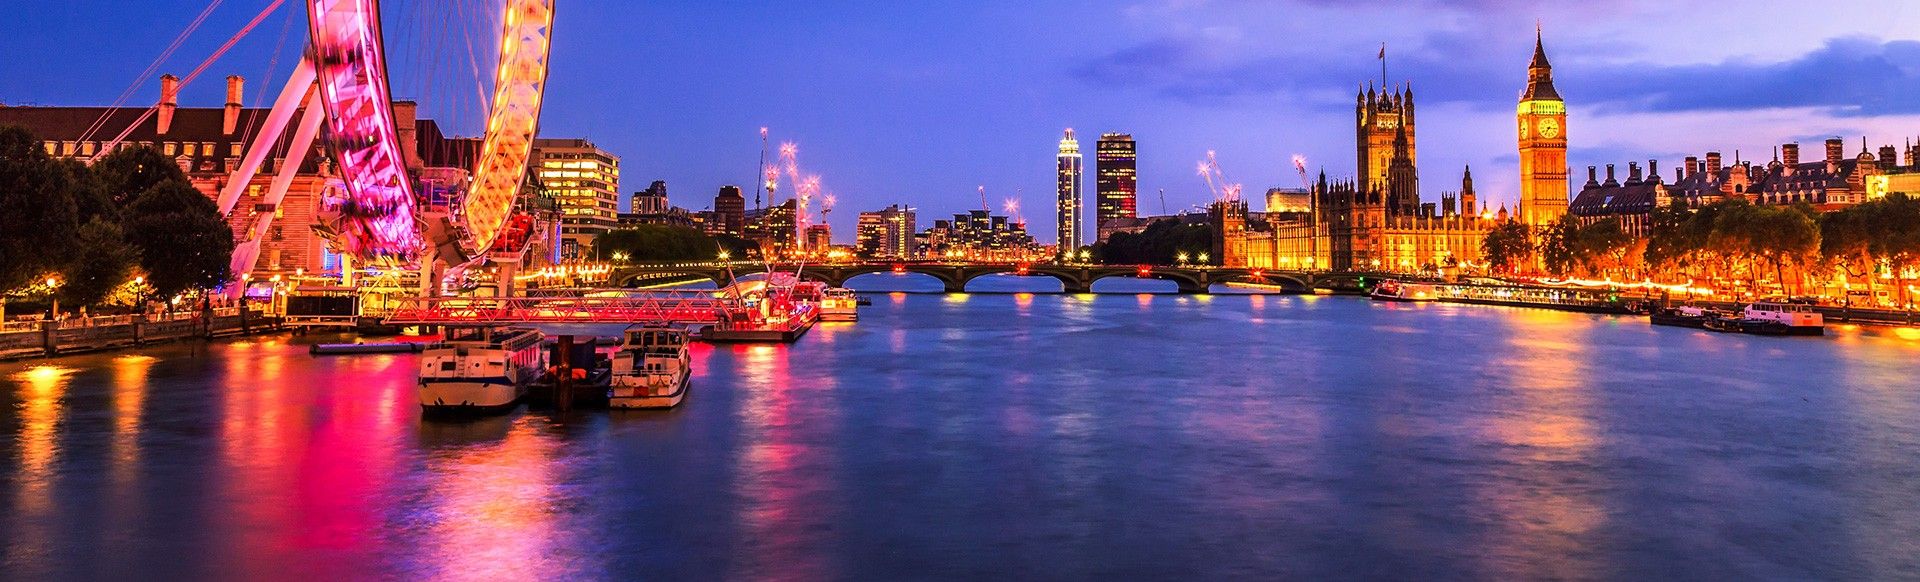 A view across the Thames at night, including the London Eye